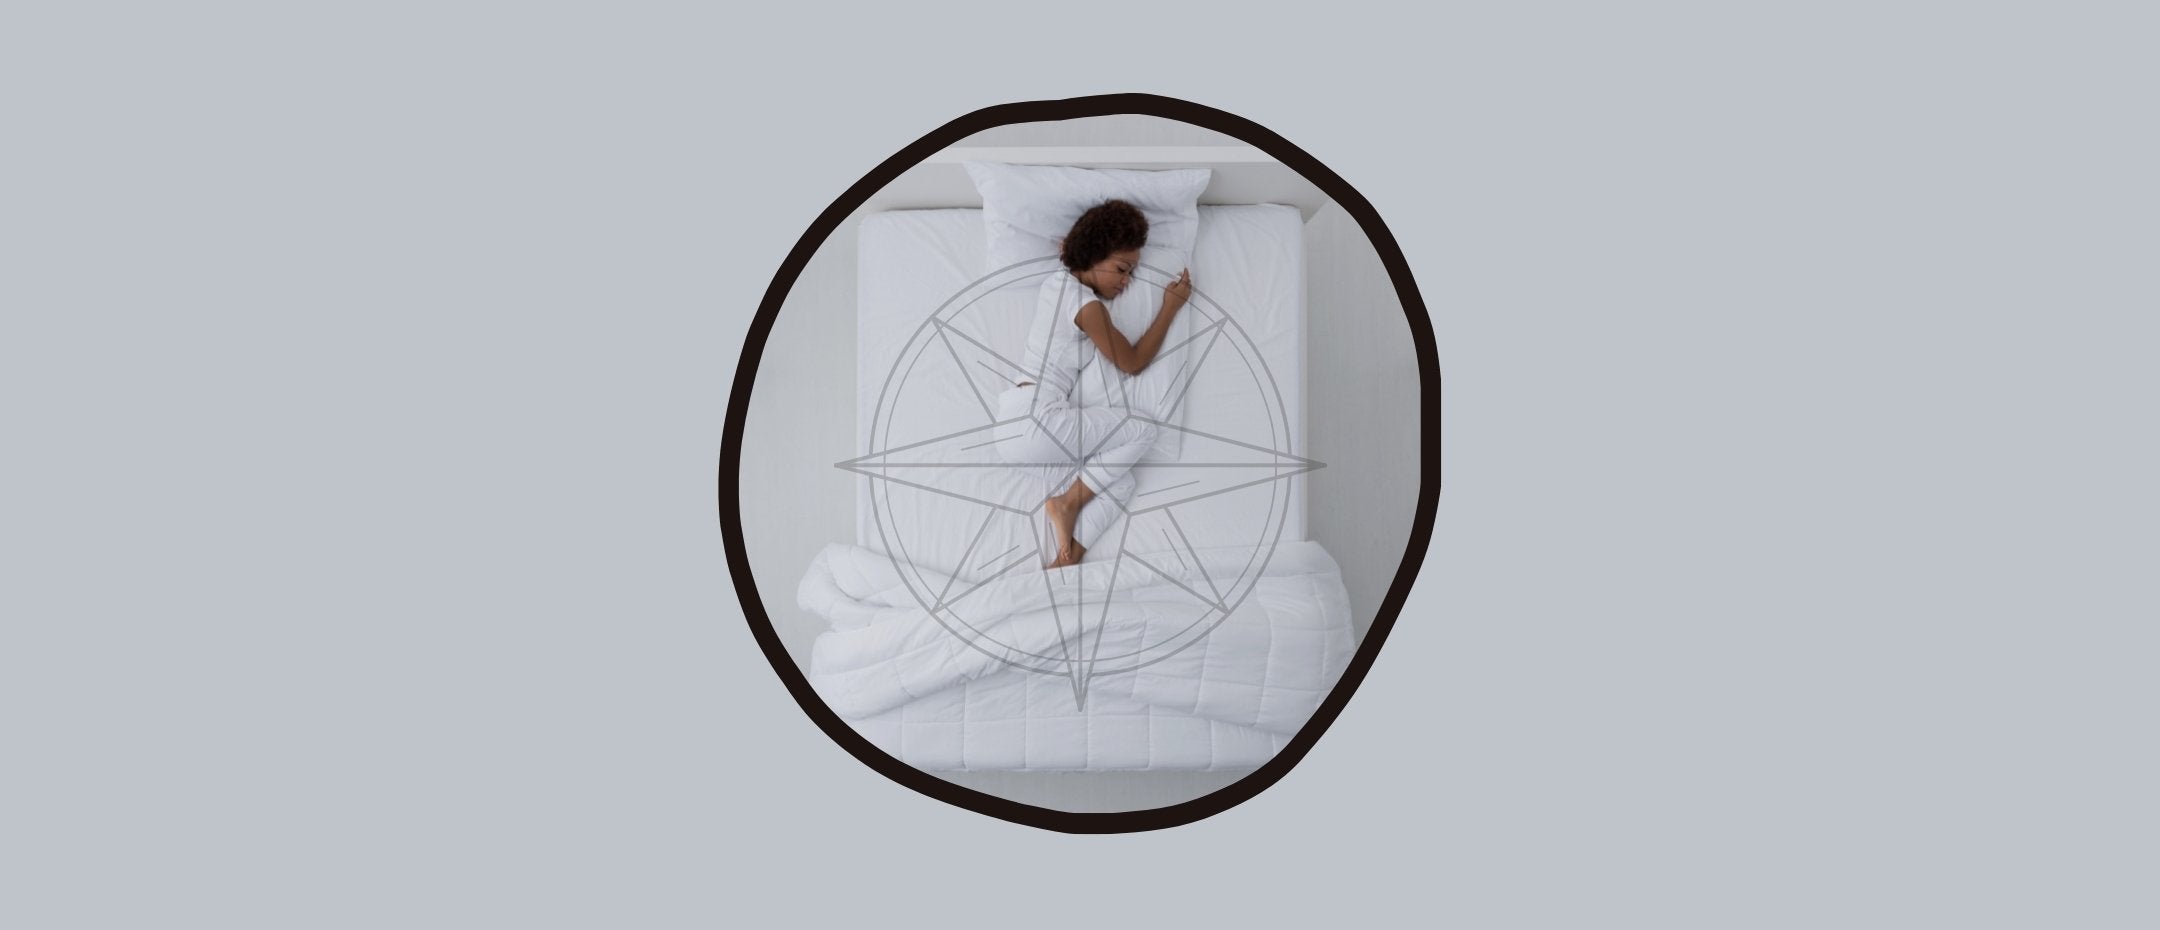 Top view of a woman lying on her mattress with a compass in the center representing the direction of the bed